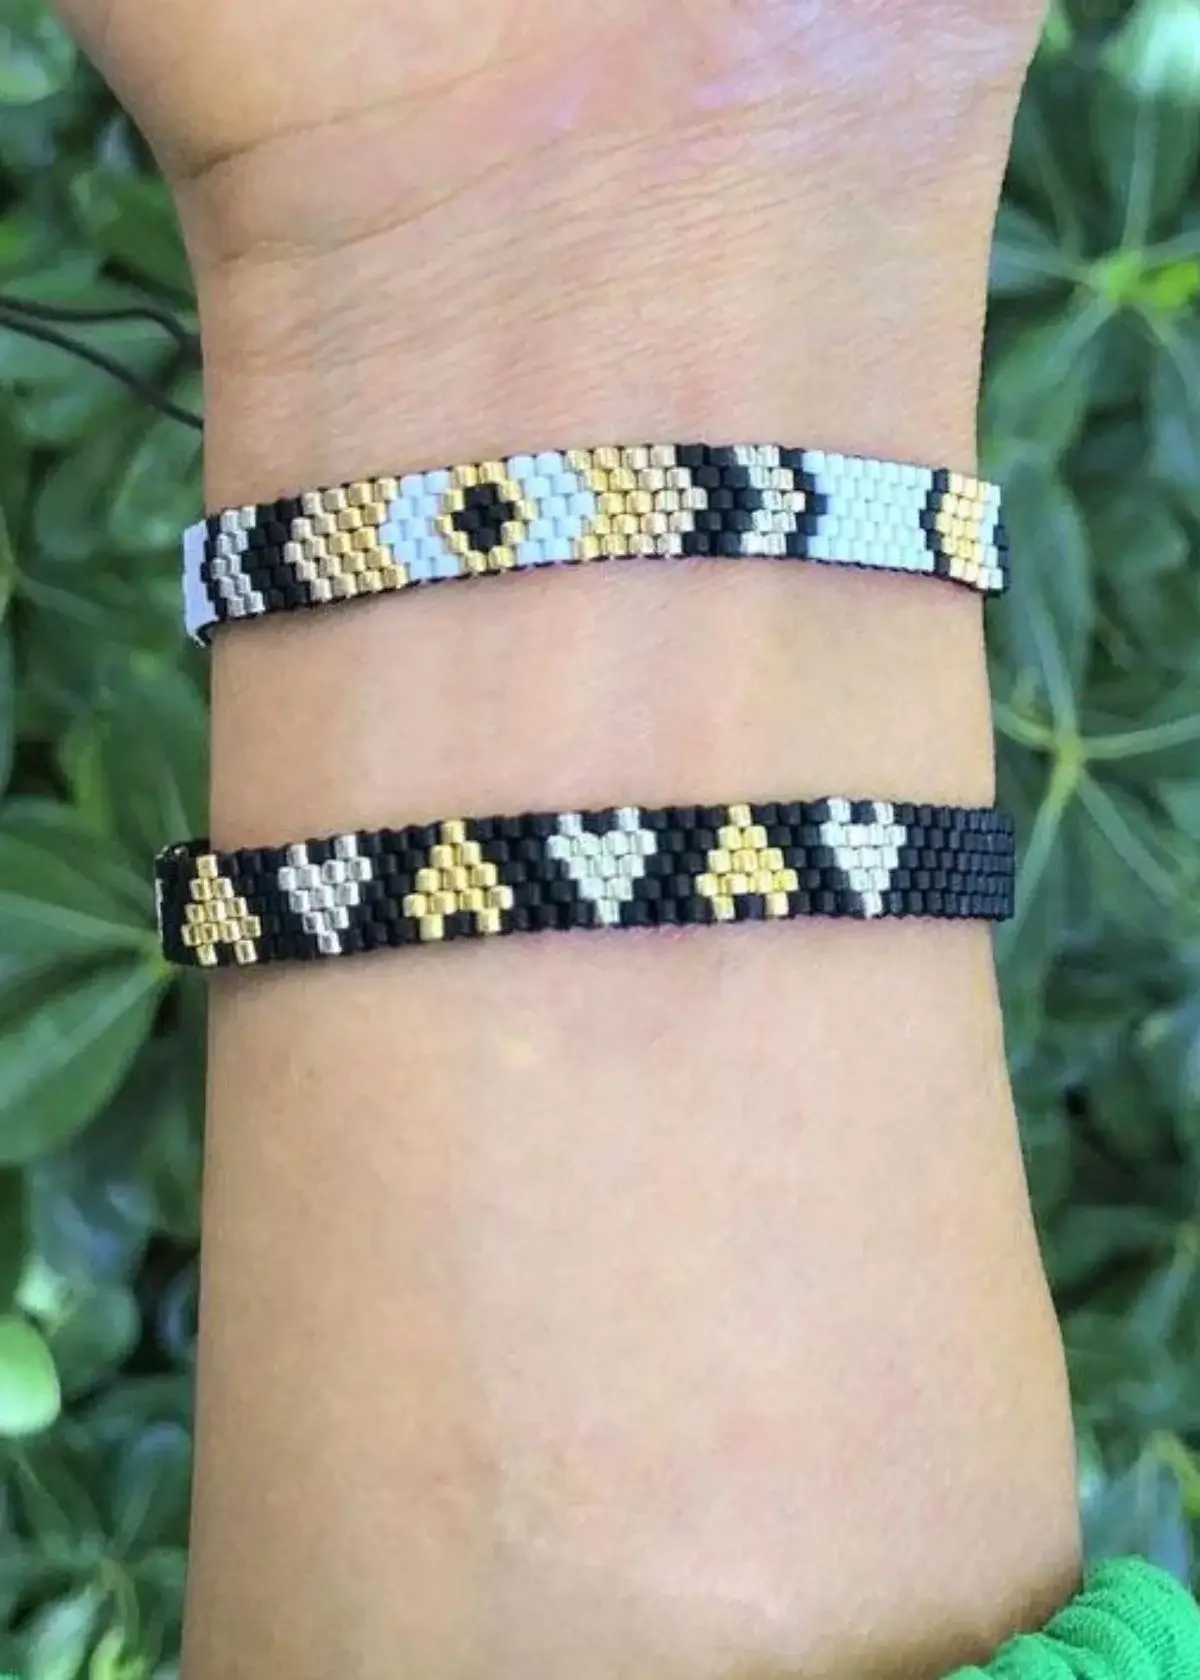 Do Mexican beaded bracelets have cultural or symbolic meanings?